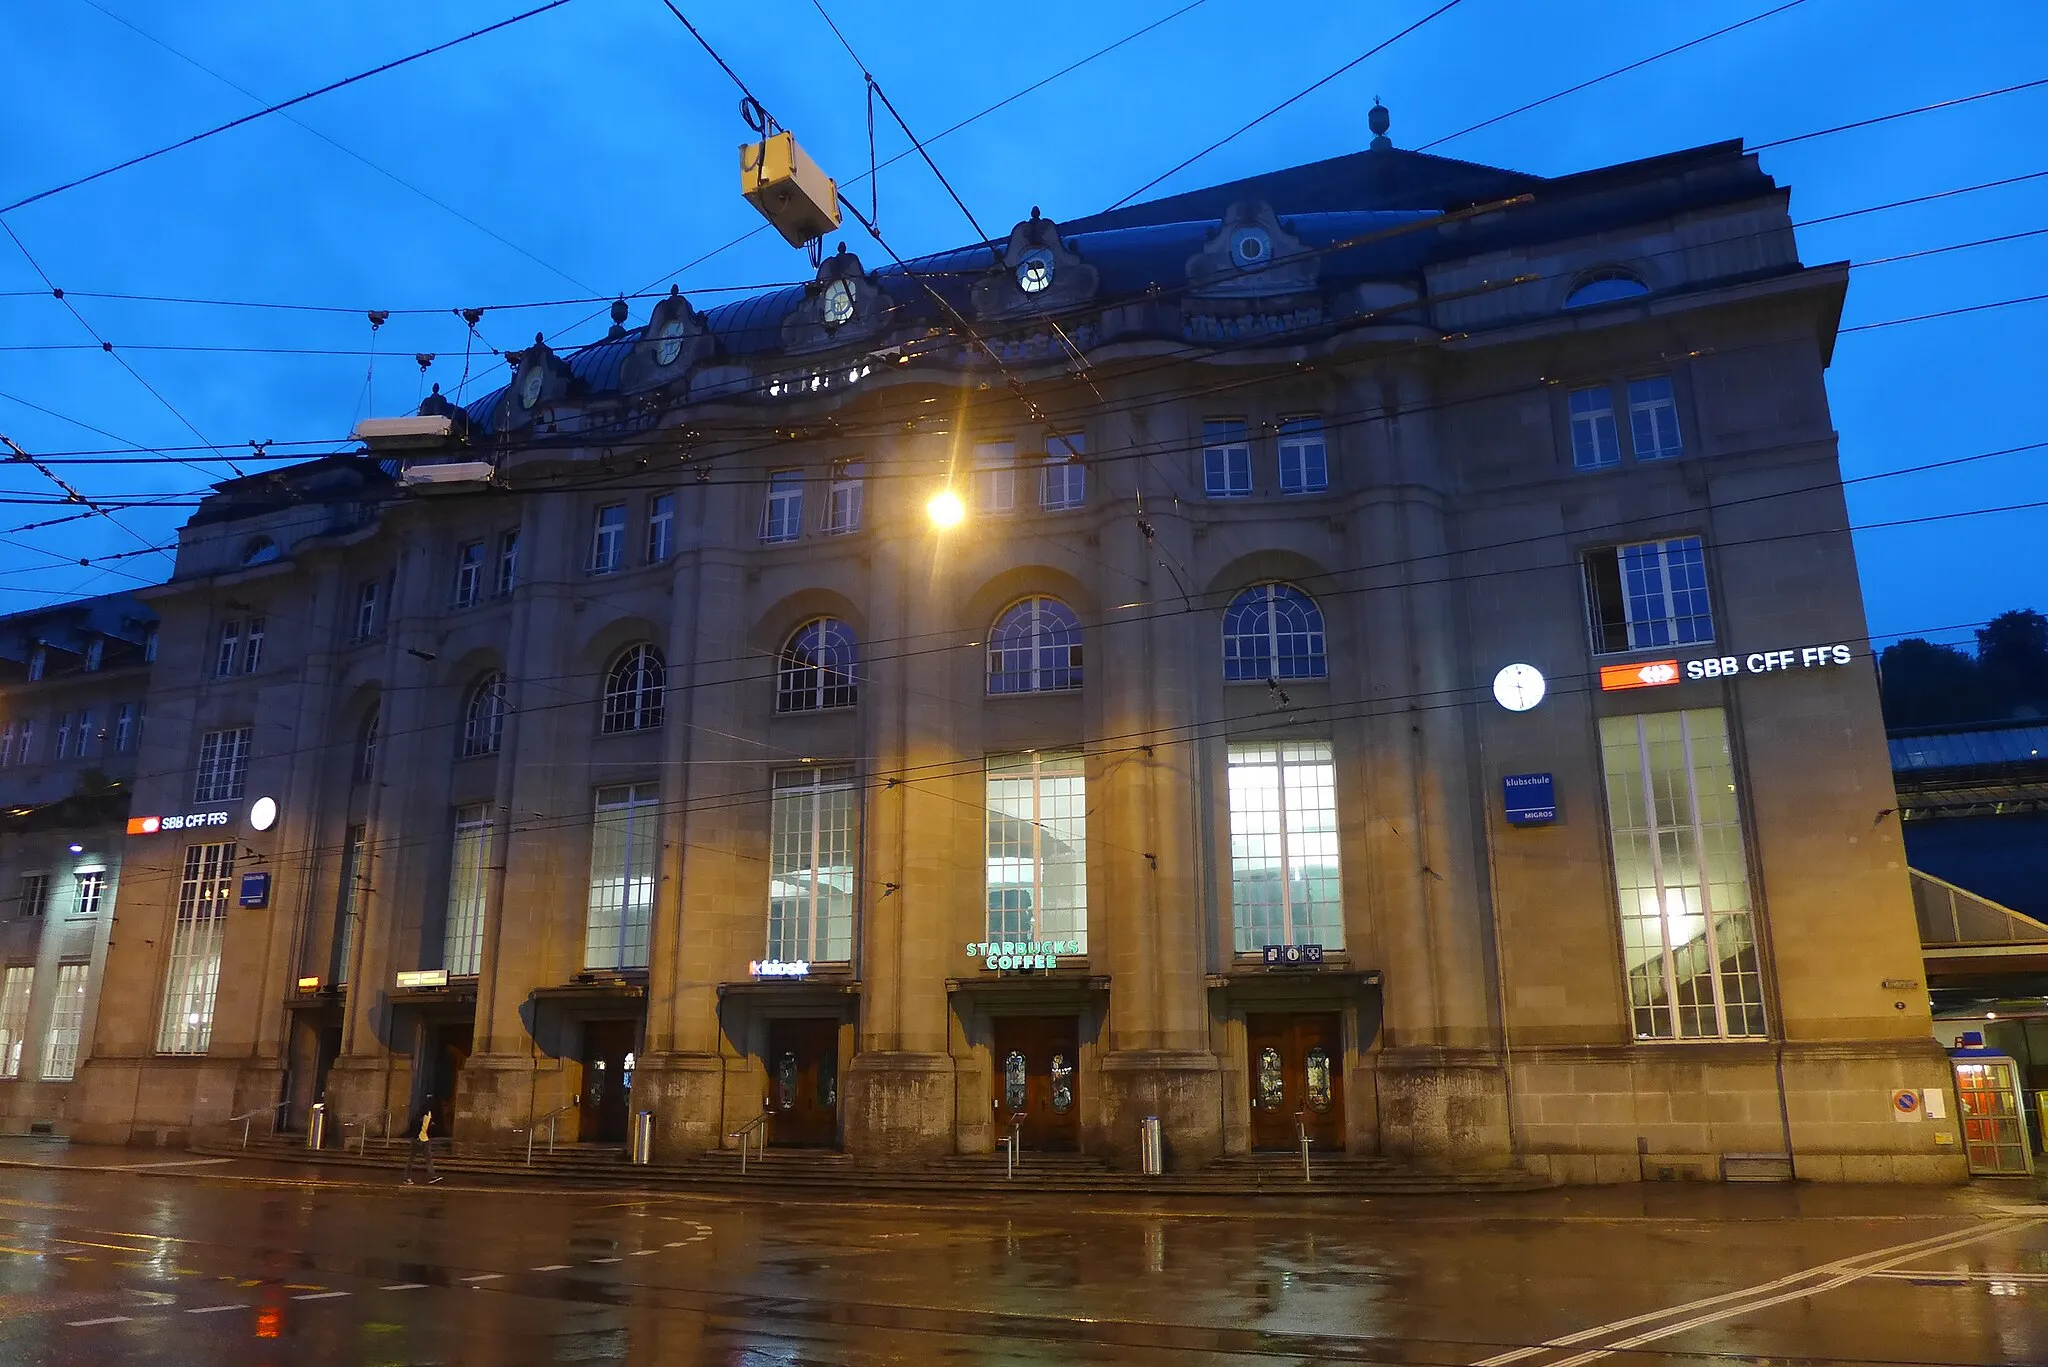 Photo showing: Night view of the station building at St. Gallen railway station, Switzerland.